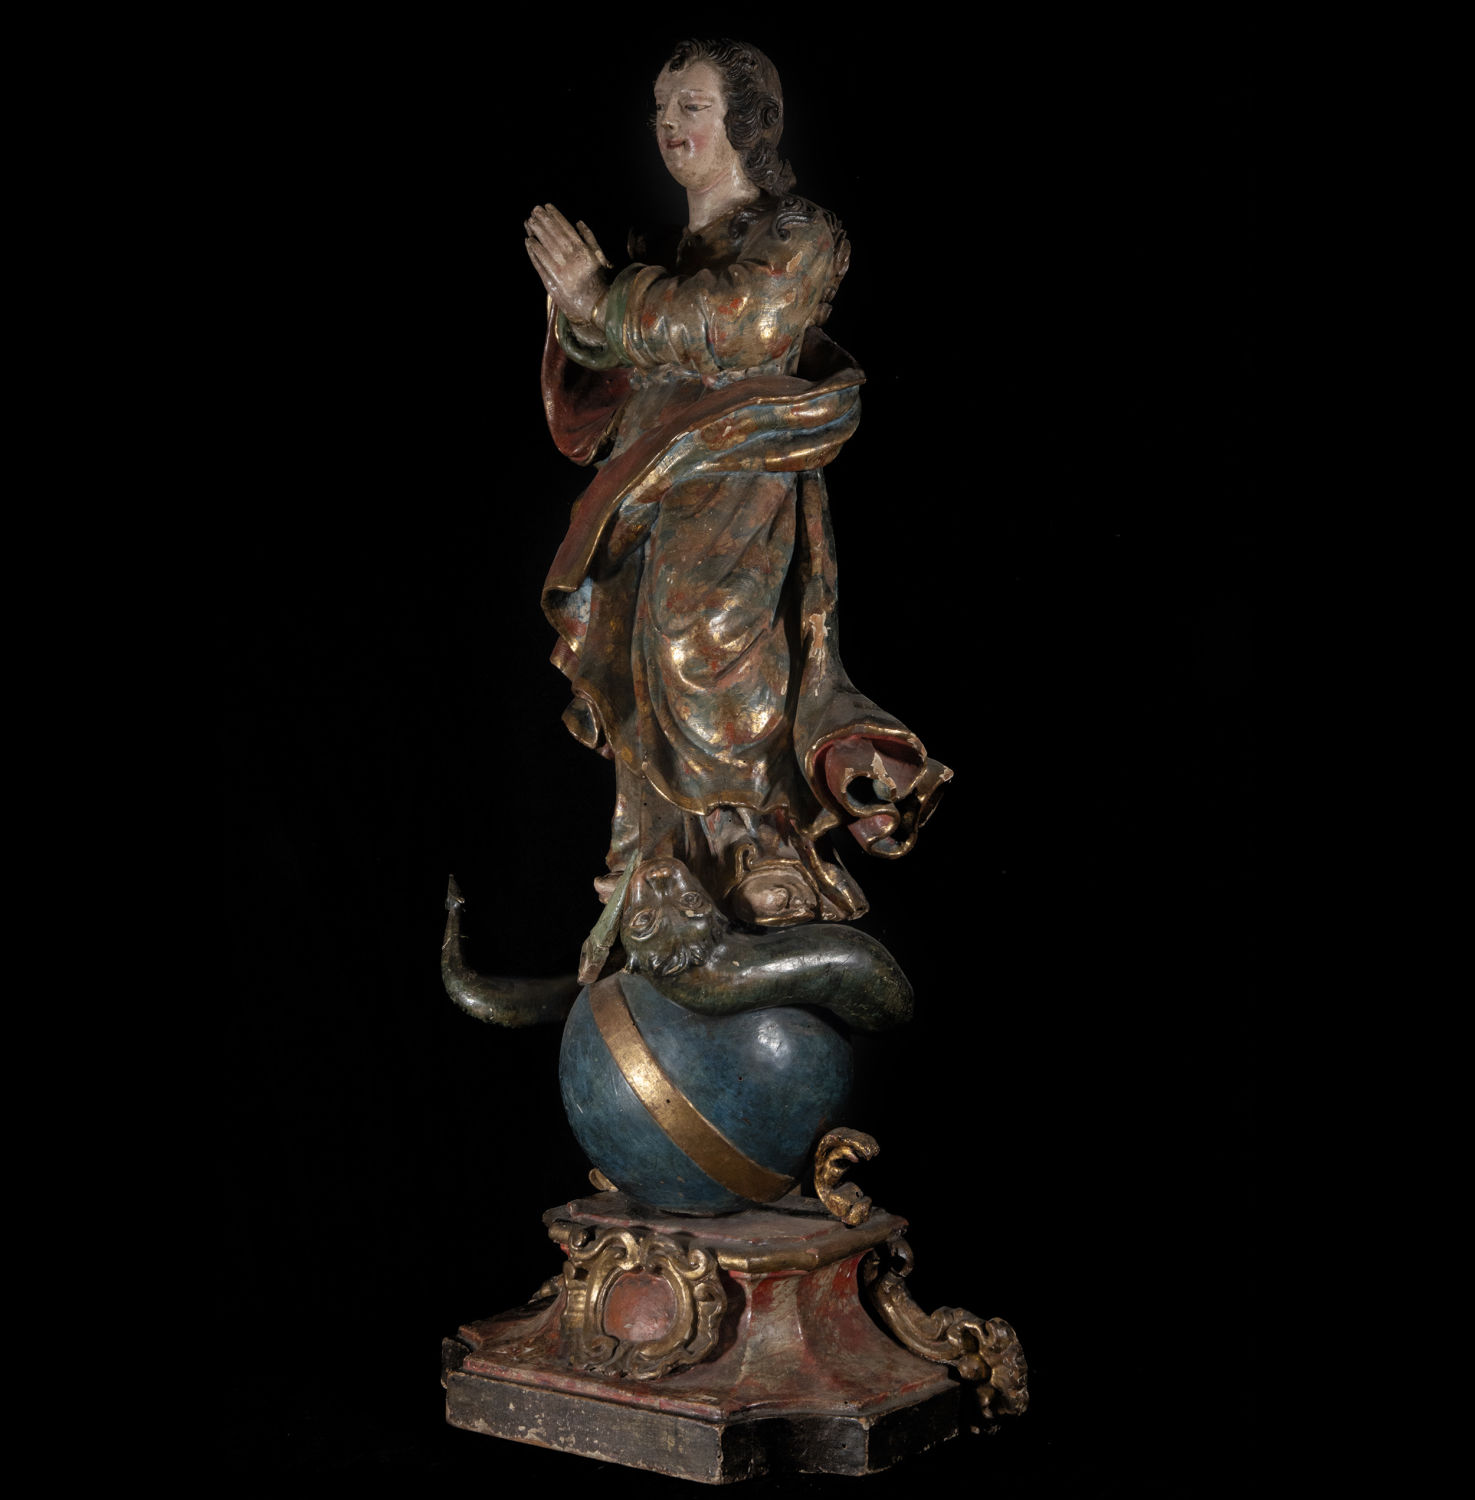 Brazilian colonial school of the 17th century - early 18th century, Mary Immaculate in Glory - Image 7 of 11